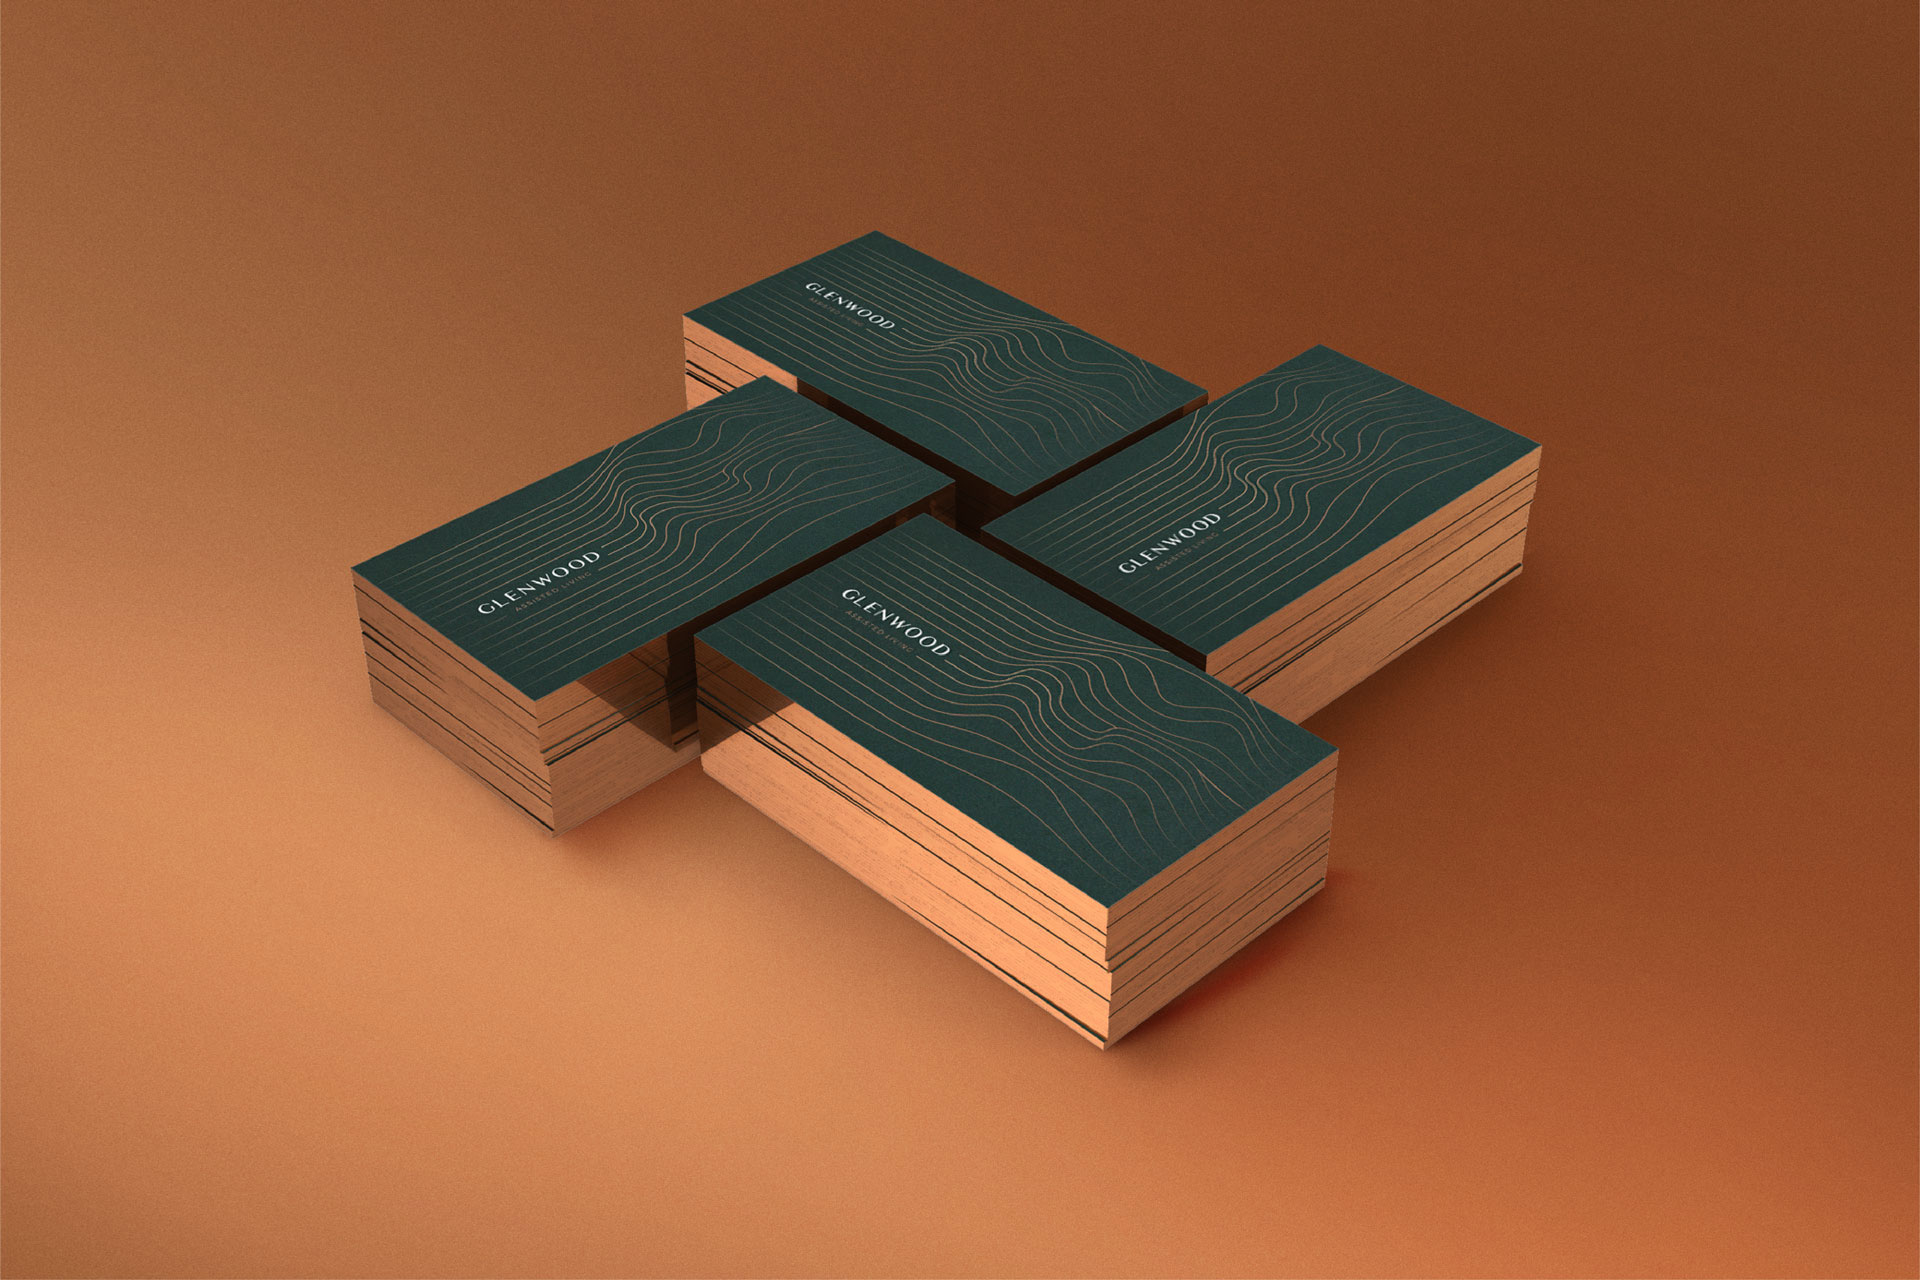 assisted living age care branding by Z Creative Studio Branding & Graphic Design Melbourne